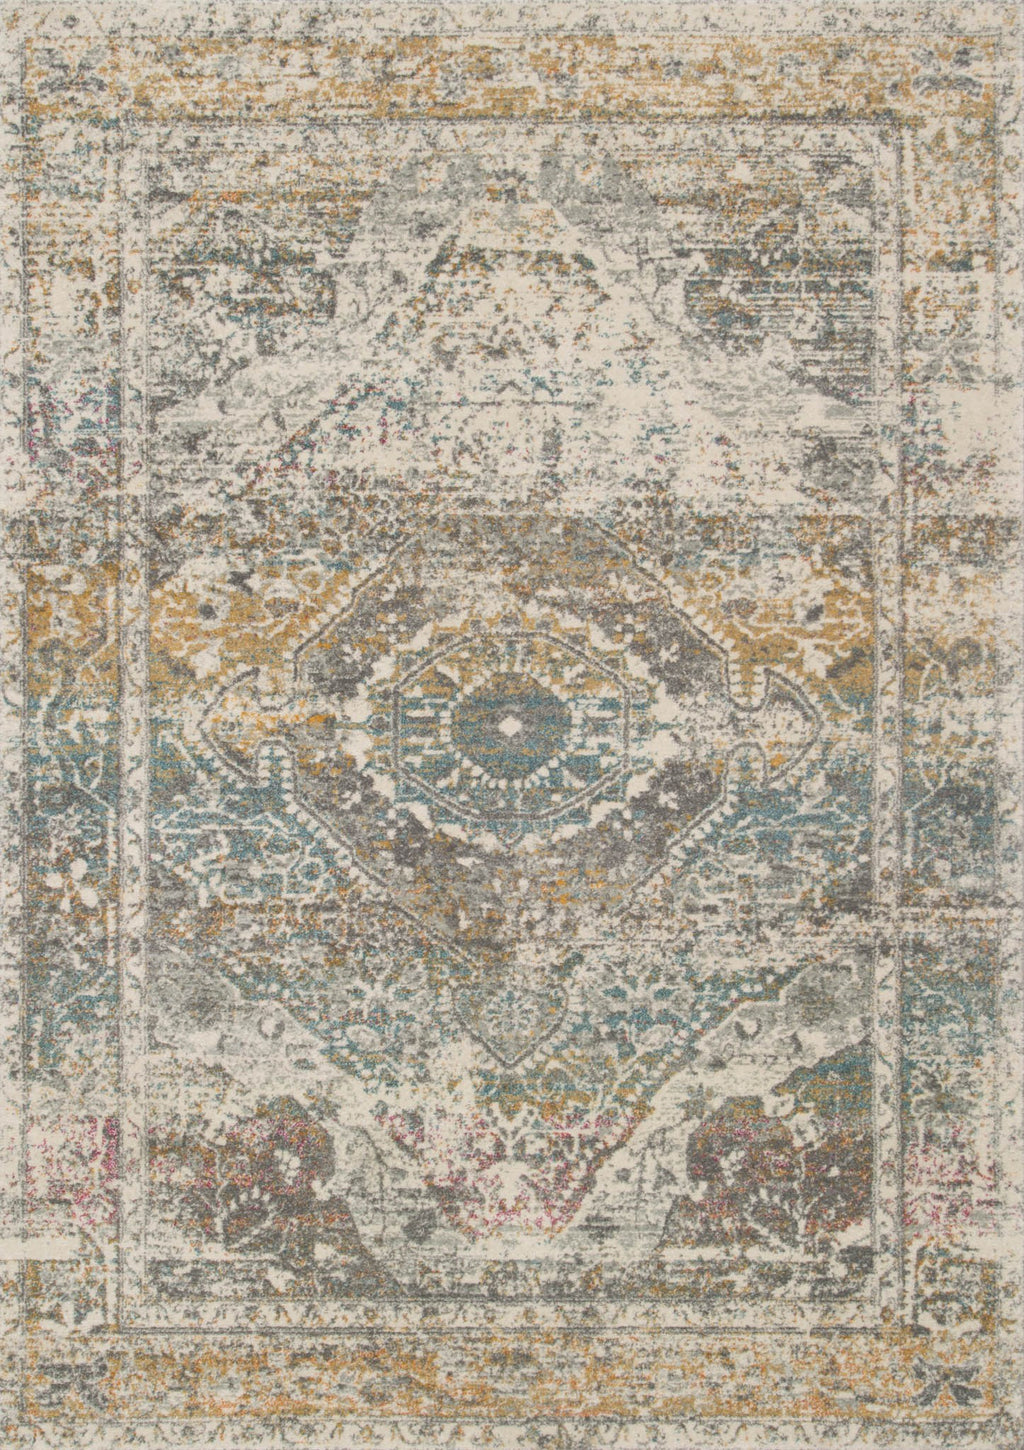 ZEHLA Collection Rug  in  STONE / STONE Gray Runner Power-Loomed Polypropylene